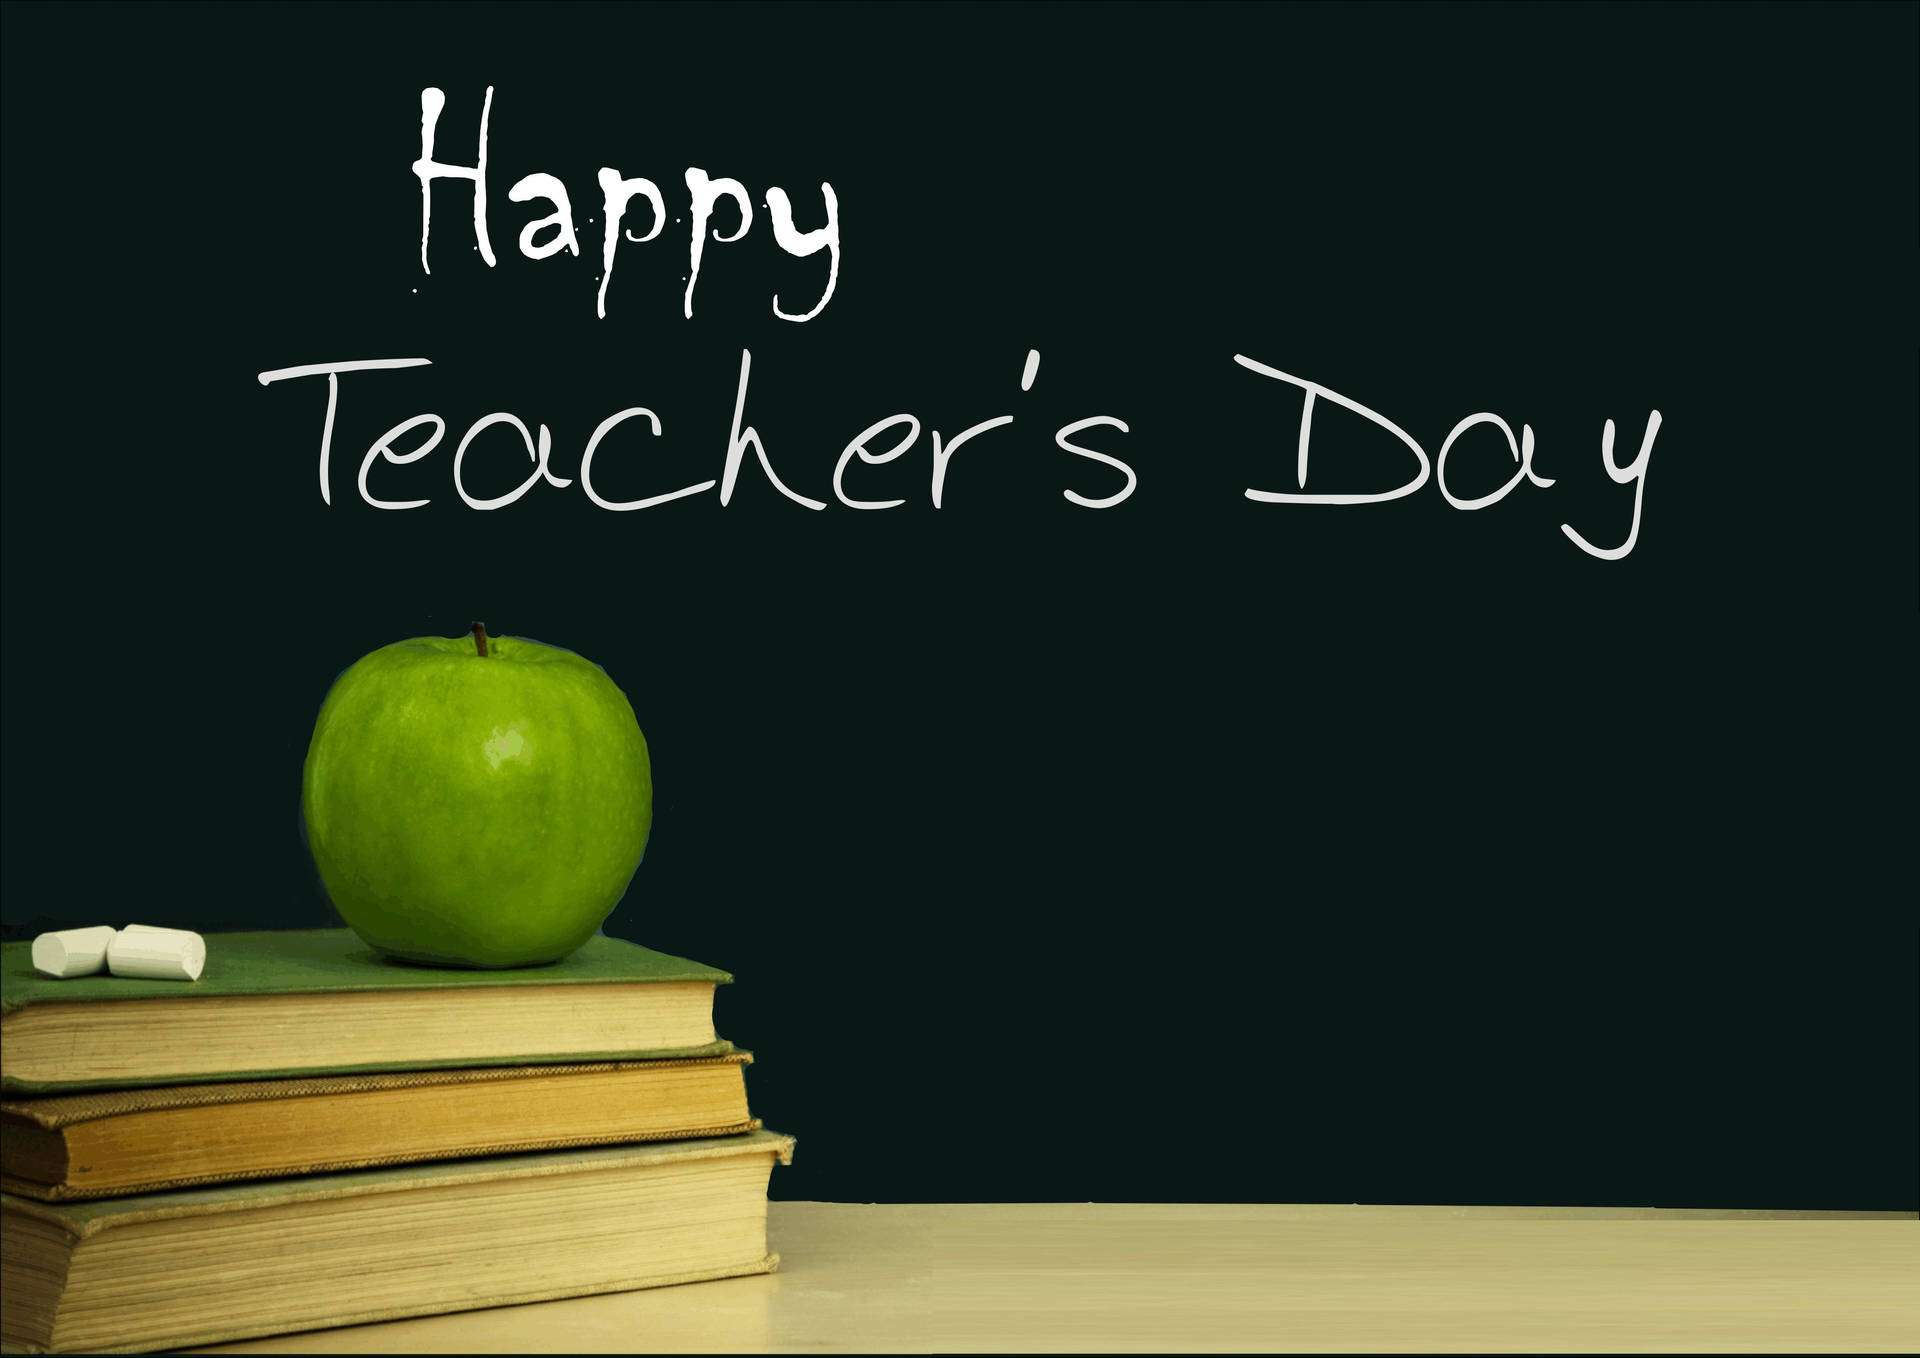 Happy Teachers' Day Books And Apple Wallpaper